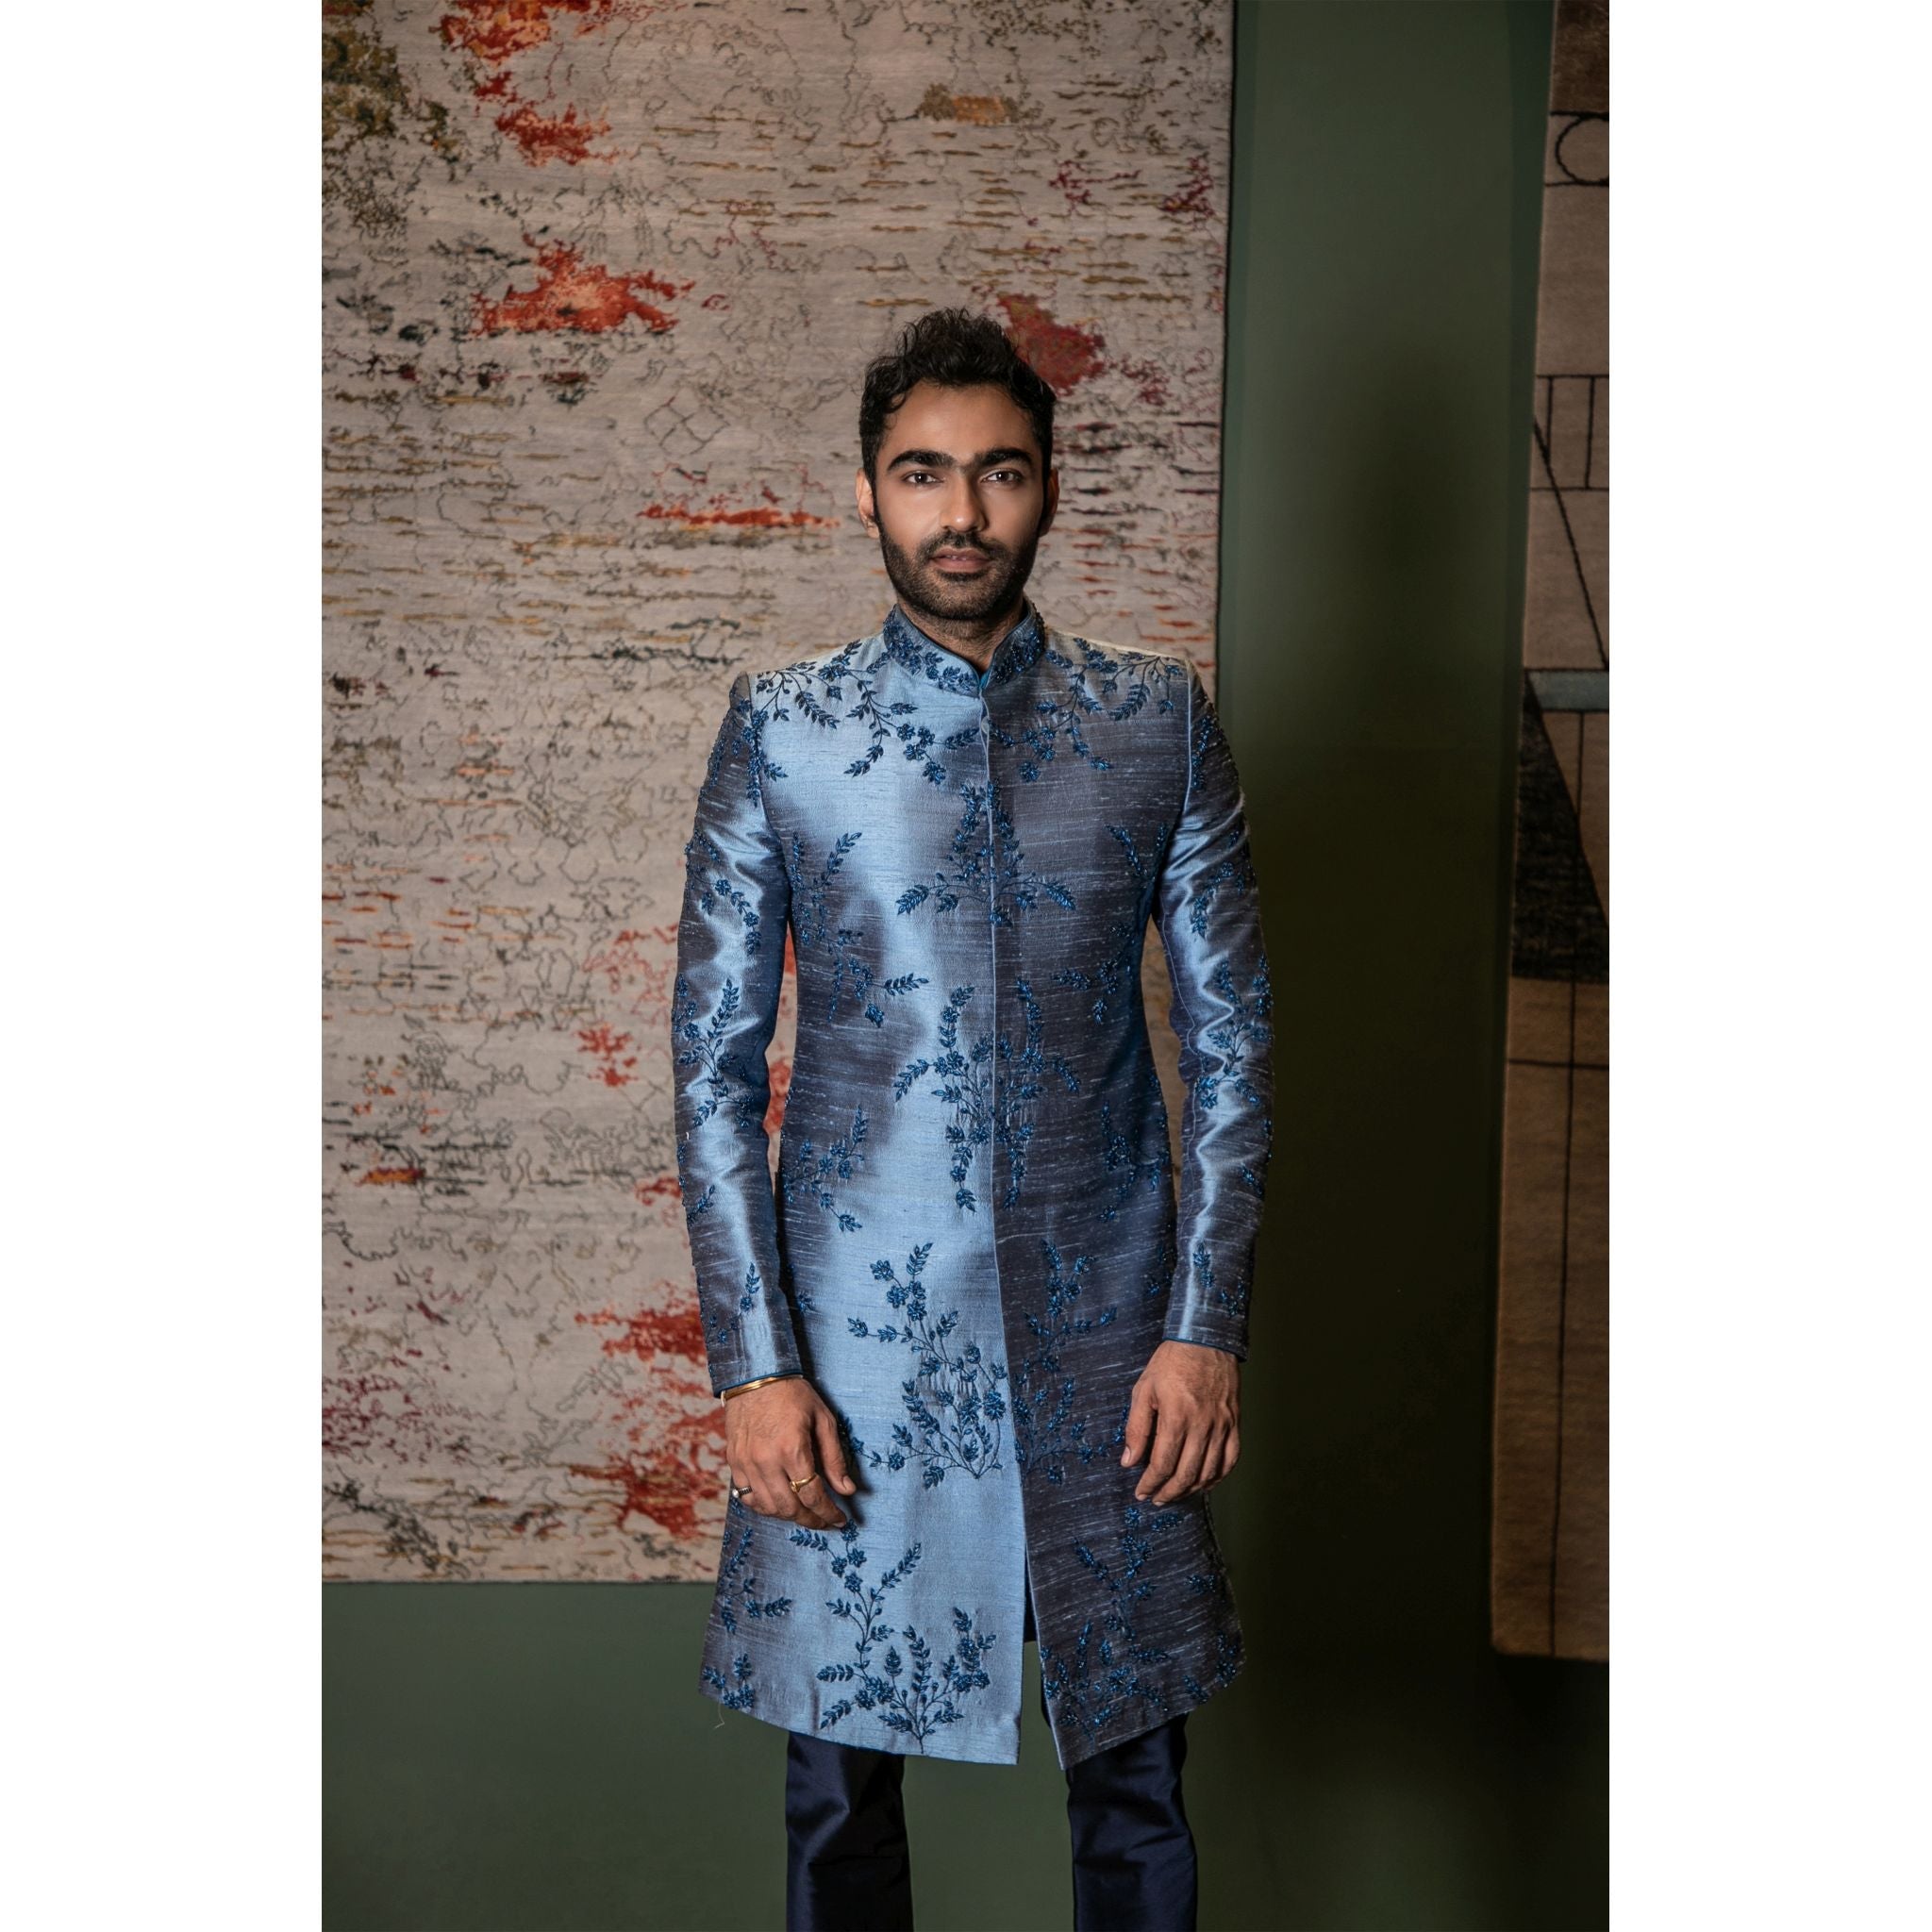 Teal And Navy Blue Embroidered Sherwani - Indian Designer Bridal Wedding Outfit